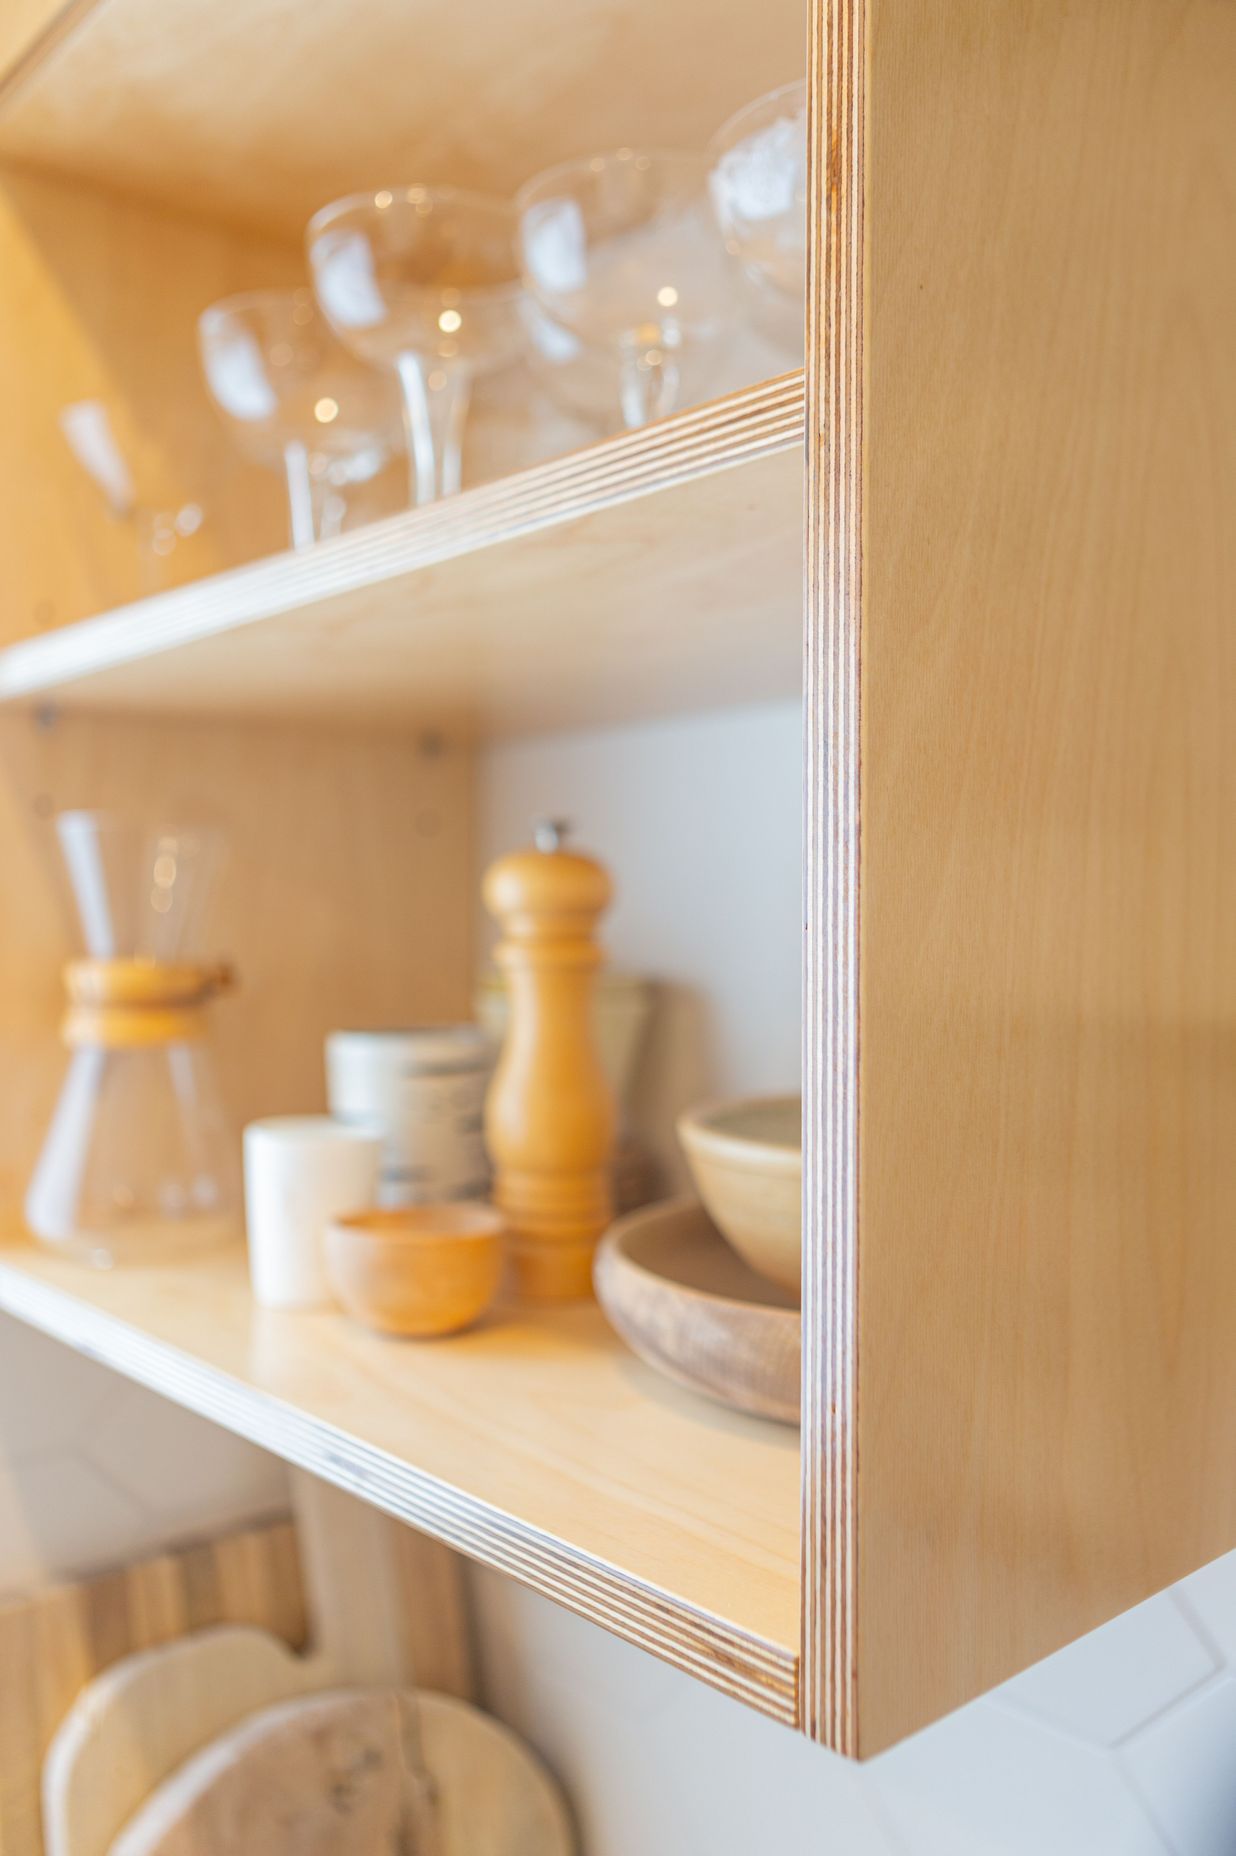 Gorgeous detailing on the birch plywood cabinetry.